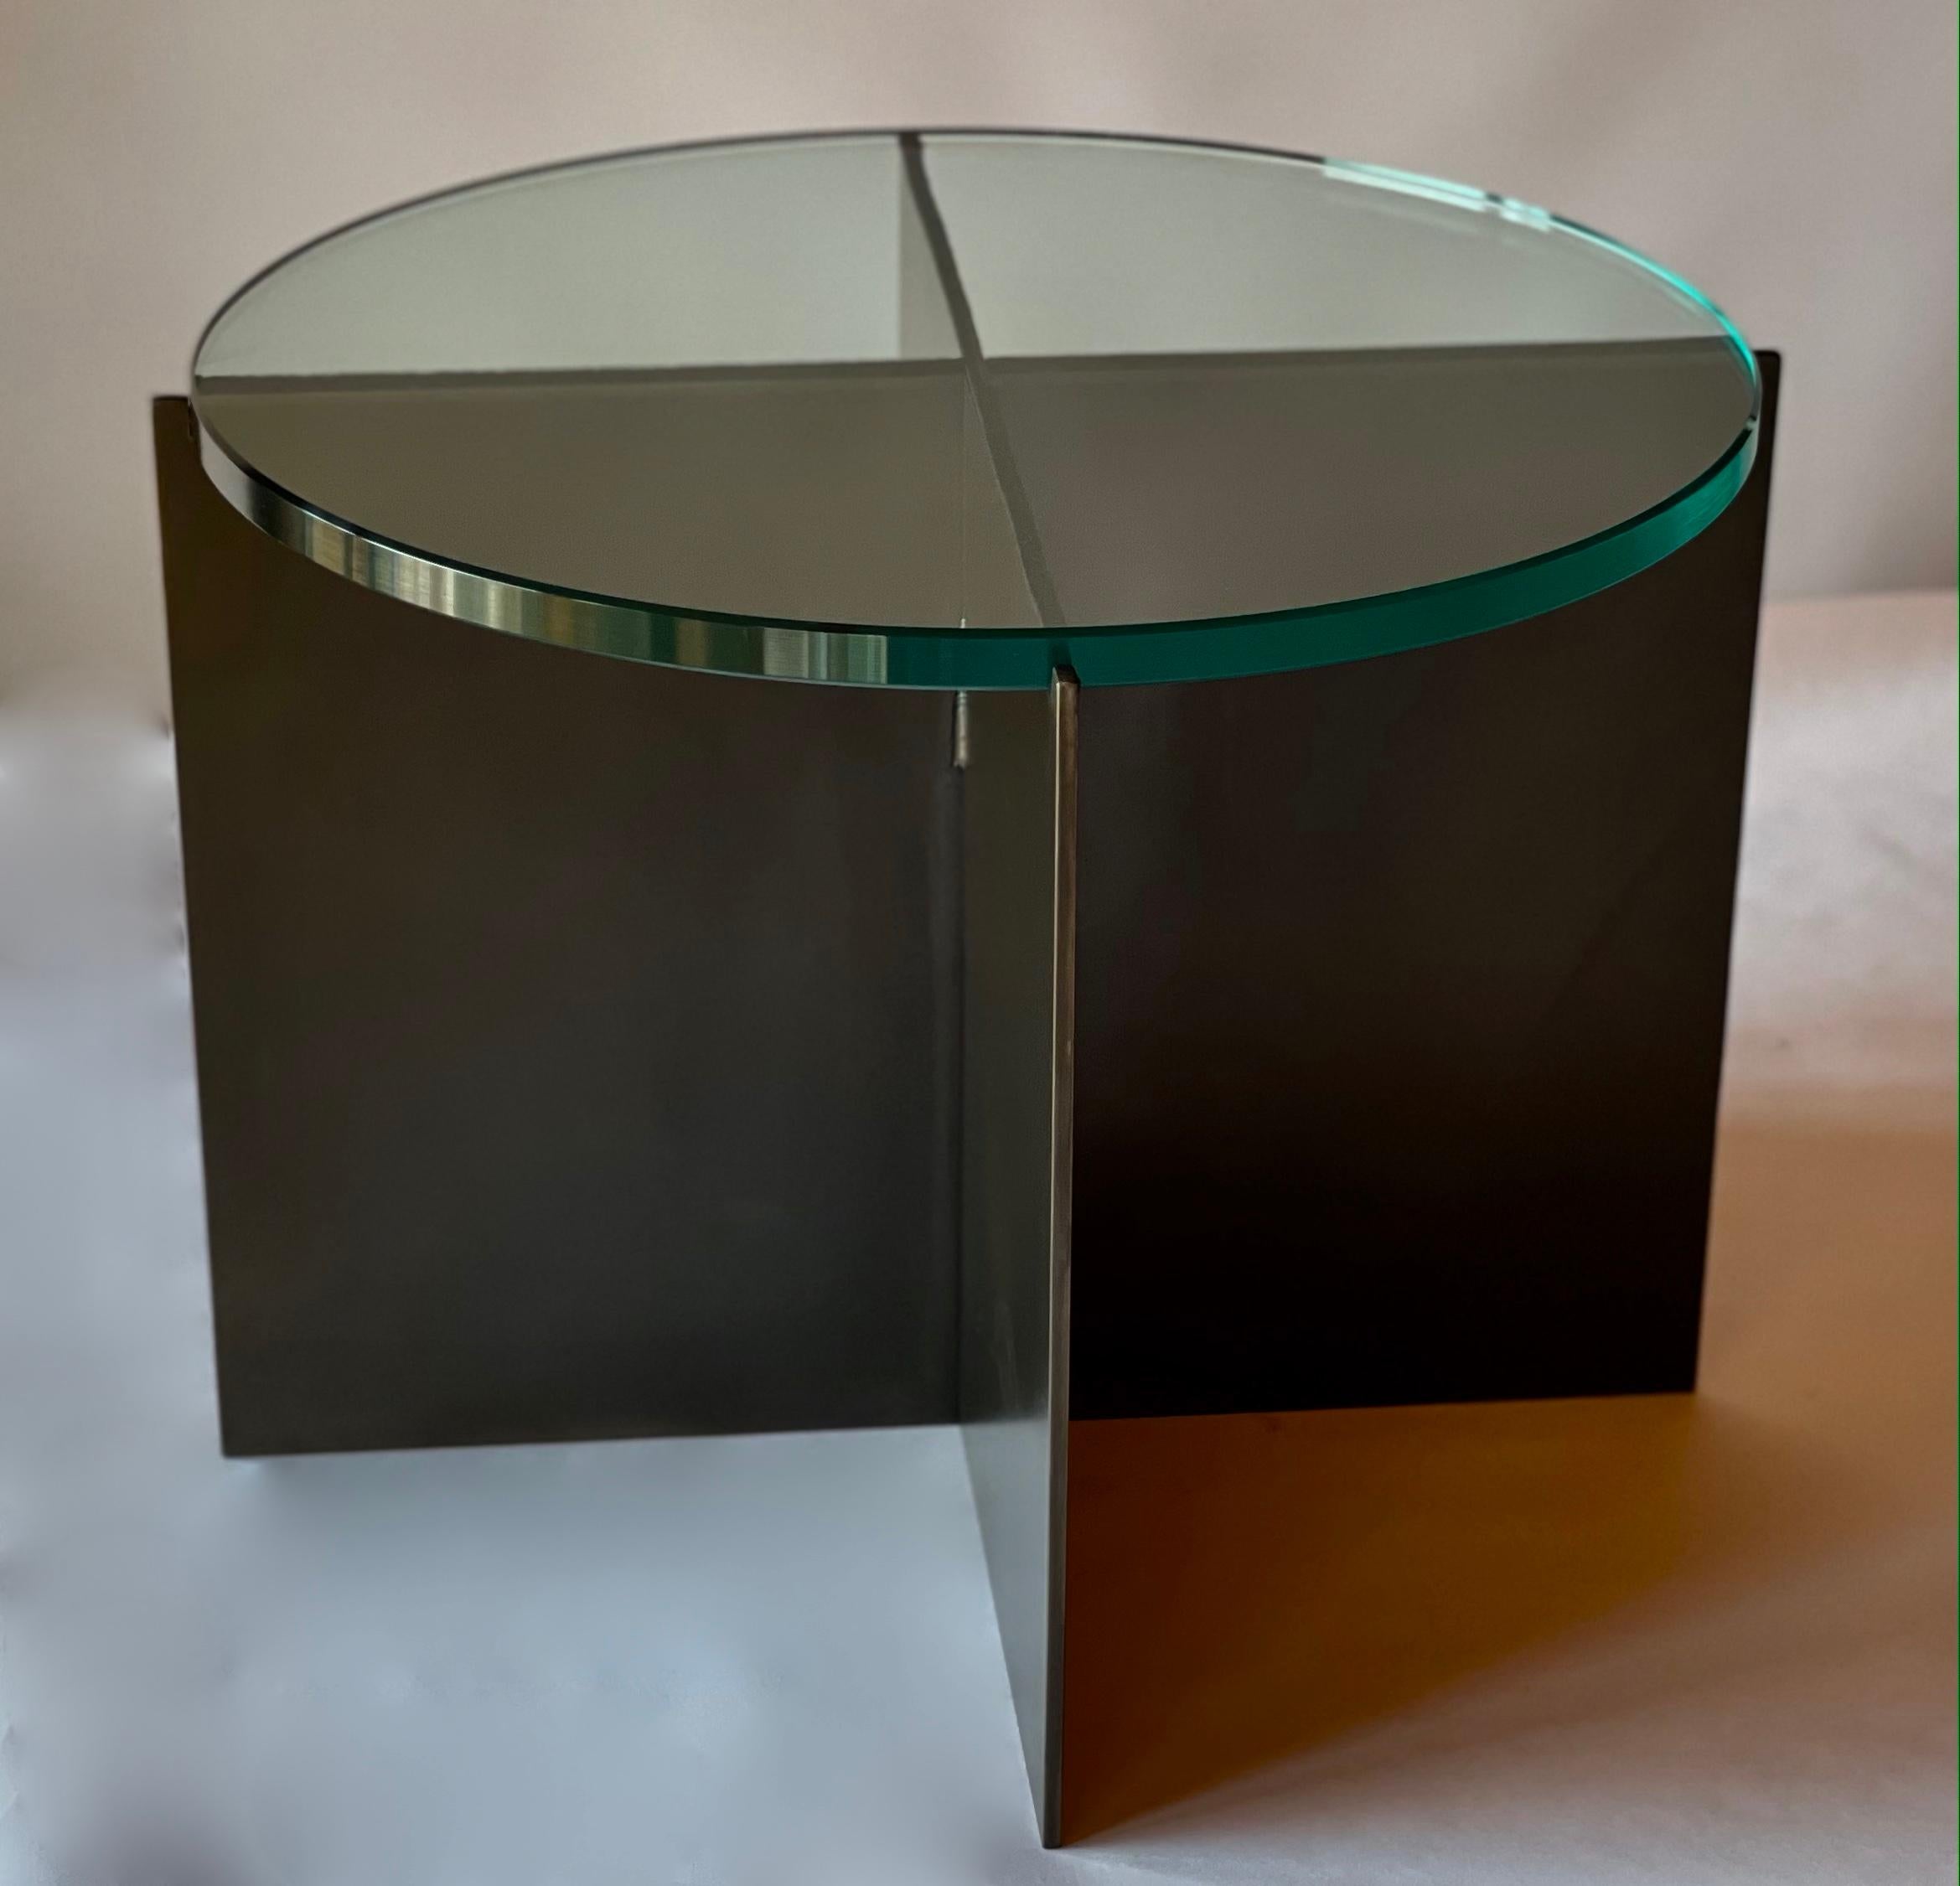 The Crux Cocktail Table, an original design offered exclusively by Vermontica, is a contemporary Minimalist blackened steel and glass side table designed and produced in Vermont by Scott Gordon. The base is made from 1/4